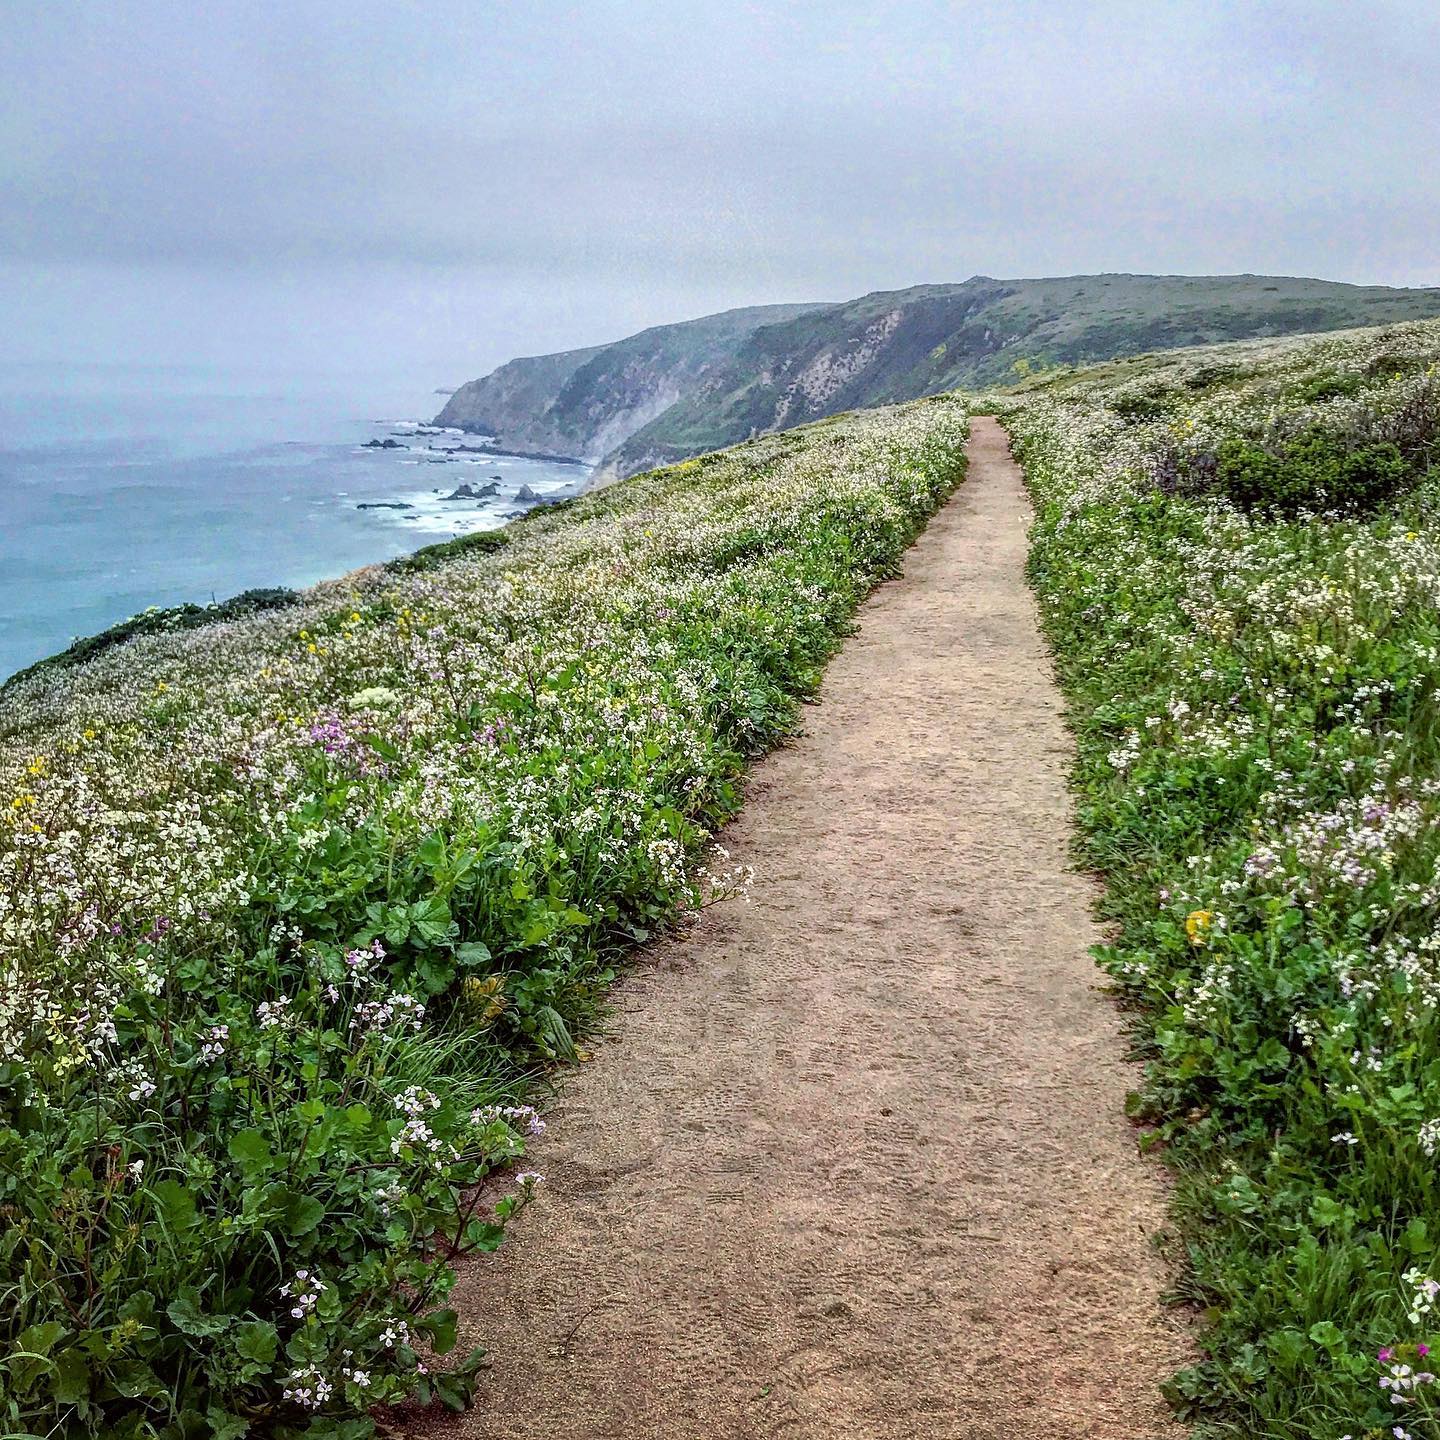 We’re back today with a new episode of the Dear Bob and Sue Podcast featuring beautiful Point Reyes National Seashore in Northern California. In addition to its coastal beaches, this park has incredible hiking trails, an abundance of wildlife, a historic lighthouse, and recreational opportunities like boating, fishing, biking and horseback riding. If you haven’t had a chance to visit this park yet, it’s definitely one you should put in your wish bucket.

You can listen to the Dear Bob and Sue Podcast for free on Apple Podcasts, Google, Spotify, Stitcher, or your favorite podcast app.